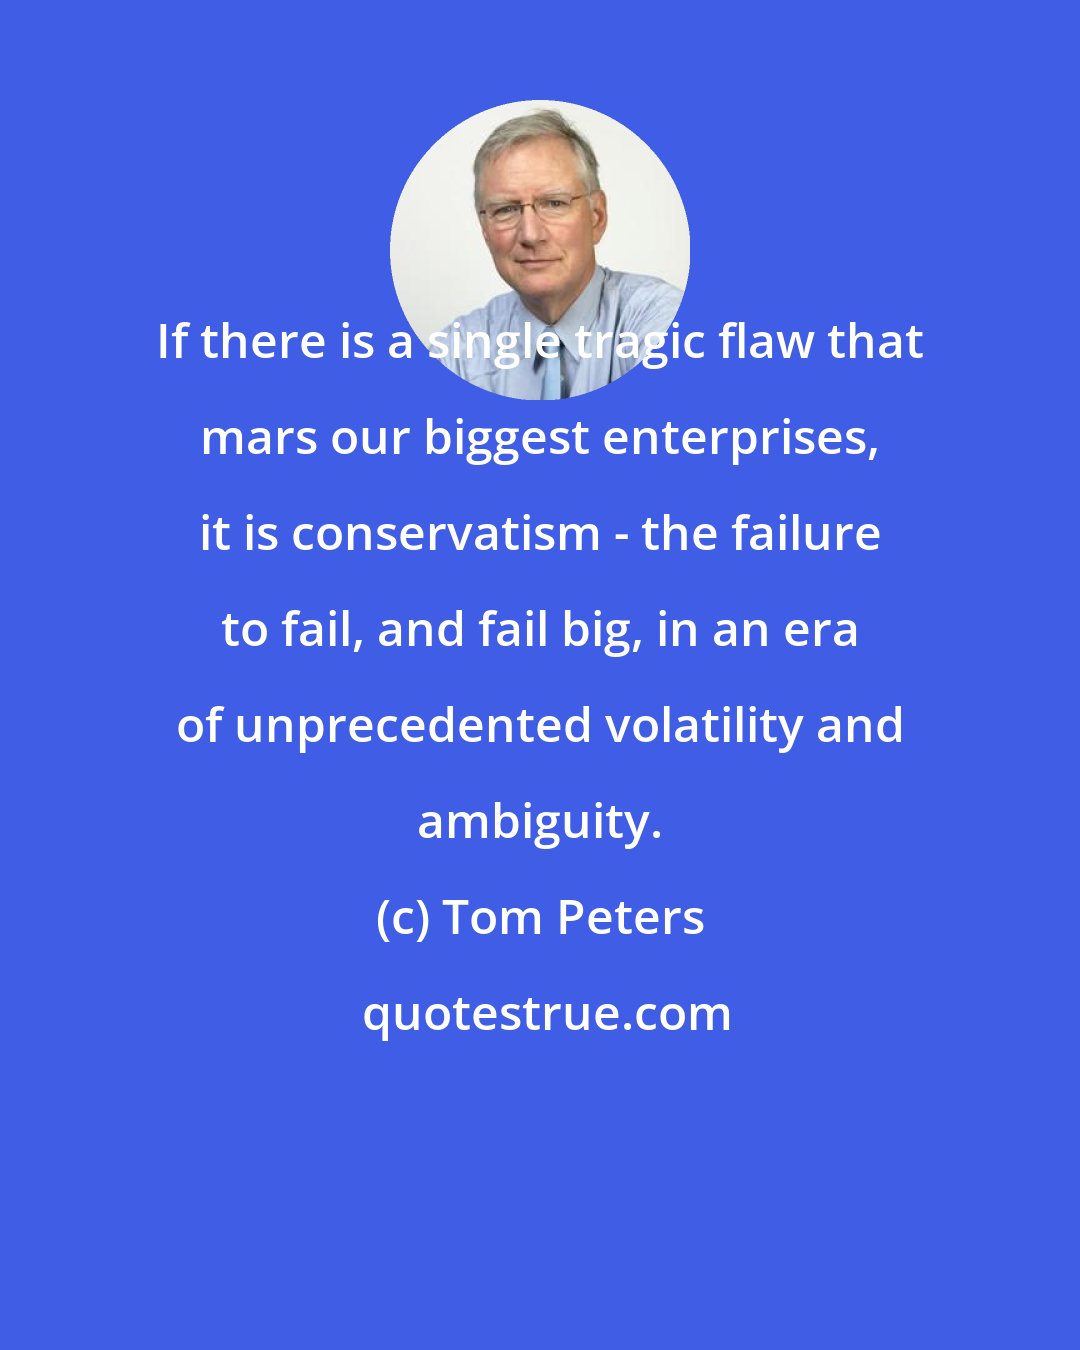 Tom Peters: If there is a single tragic flaw that mars our biggest enterprises, it is conservatism - the failure to fail, and fail big, in an era of unprecedented volatility and ambiguity.